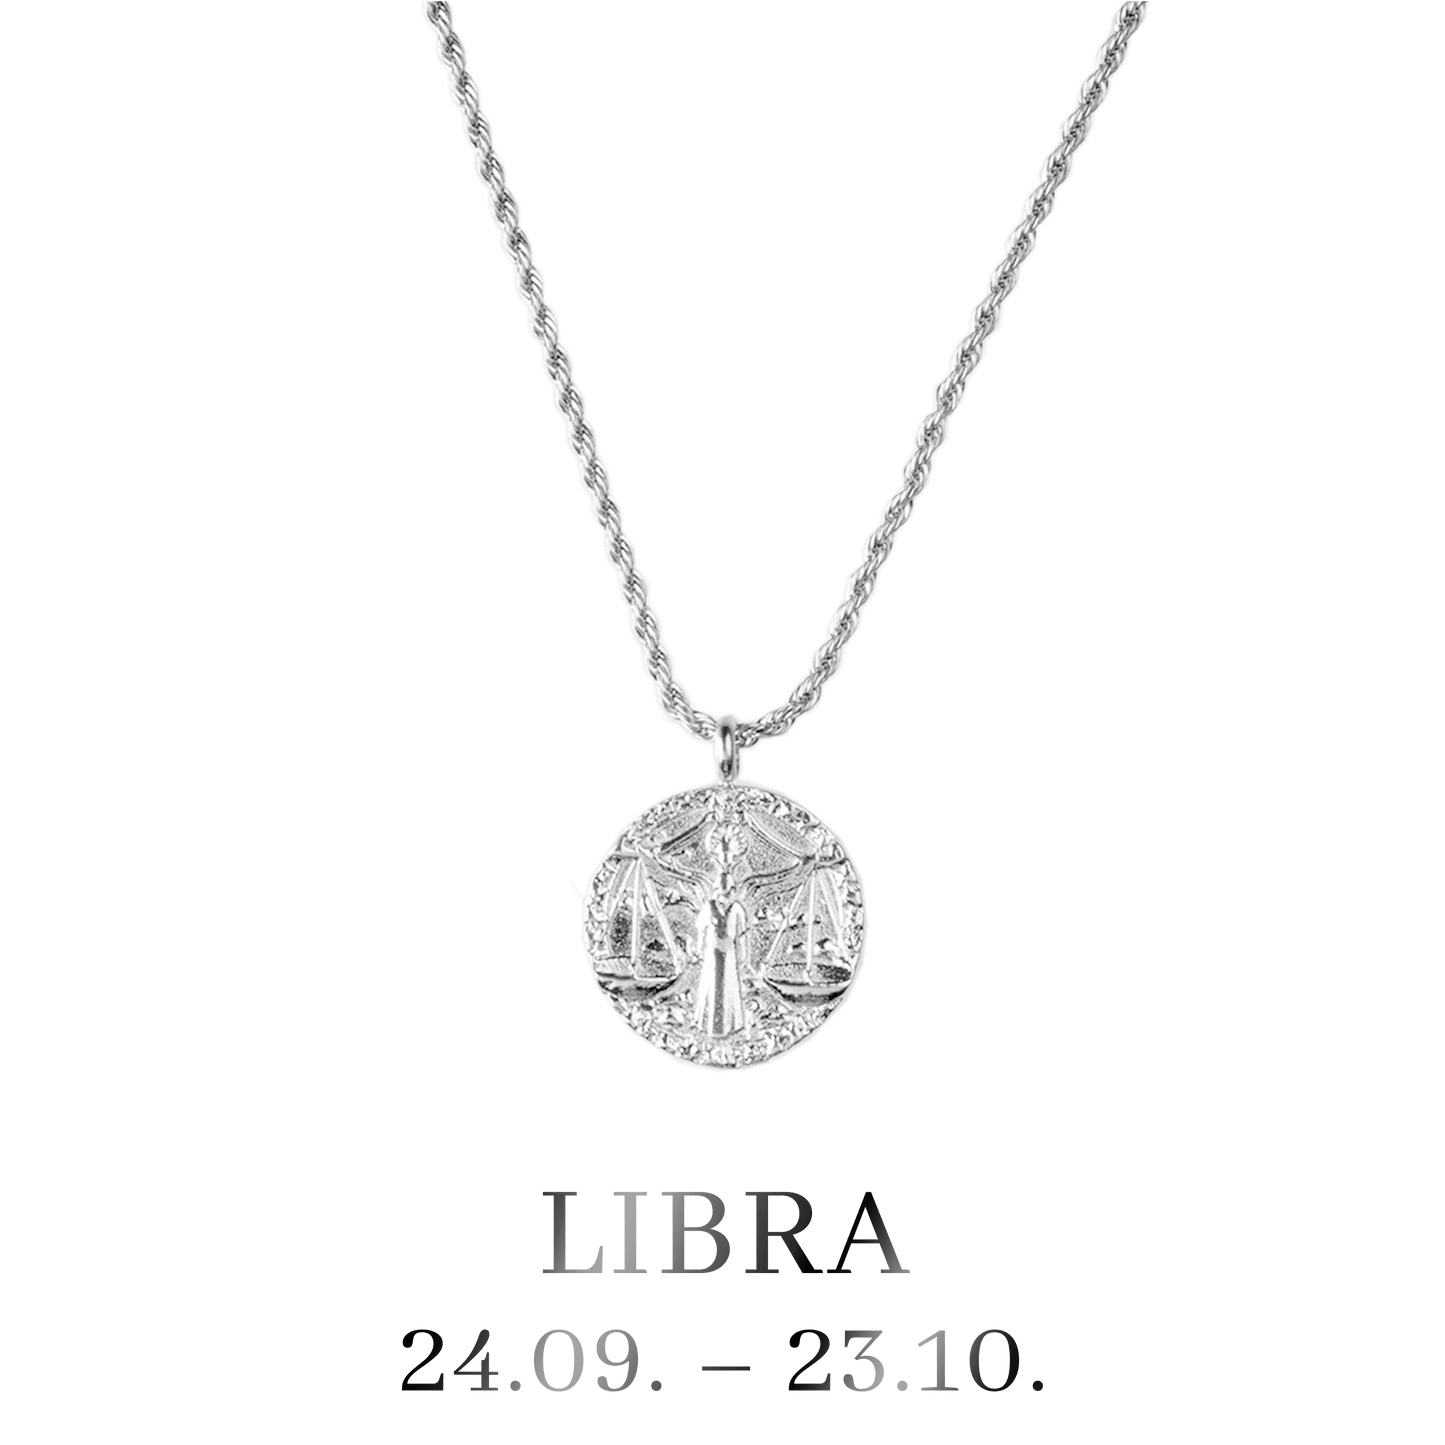 Libra / Waage Necklace Silber